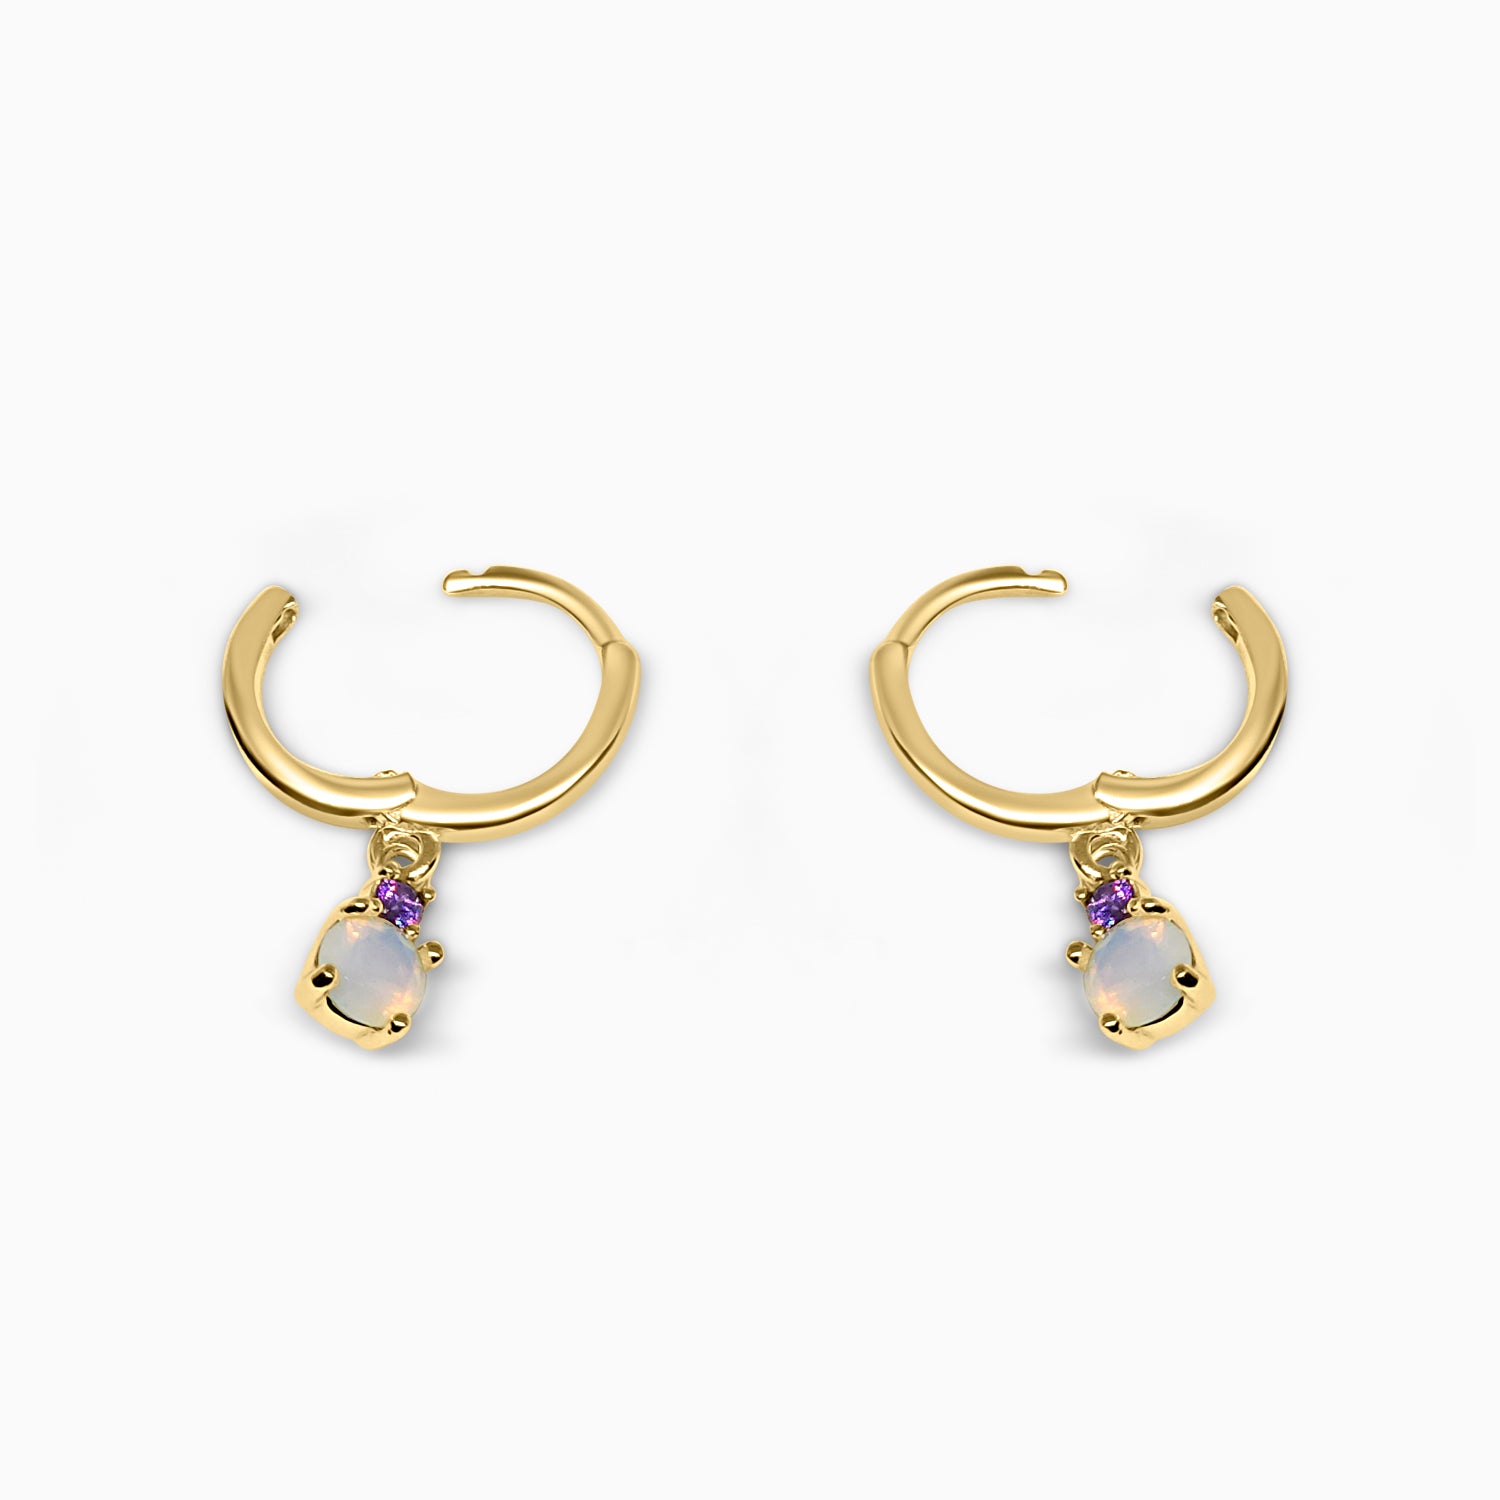 Silver Gold Hoops with Dangling Moonstone Earrings